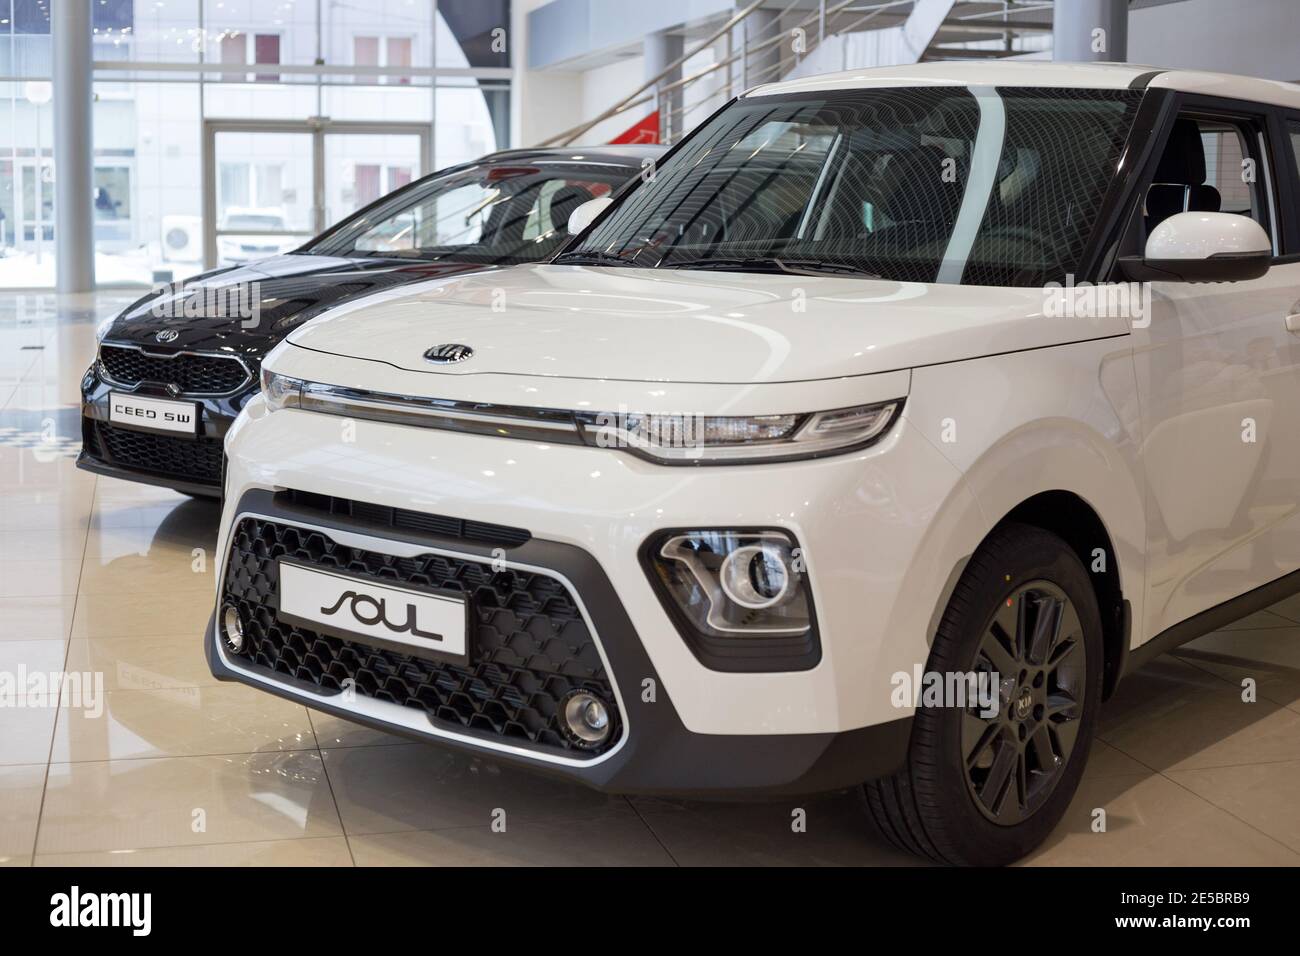 Russia, Izhevsk - December 28, 2020: KIA showroom. New Ceed SW and Soul in dealer showroom. Front and side view. Famous world brand. Stock Photo